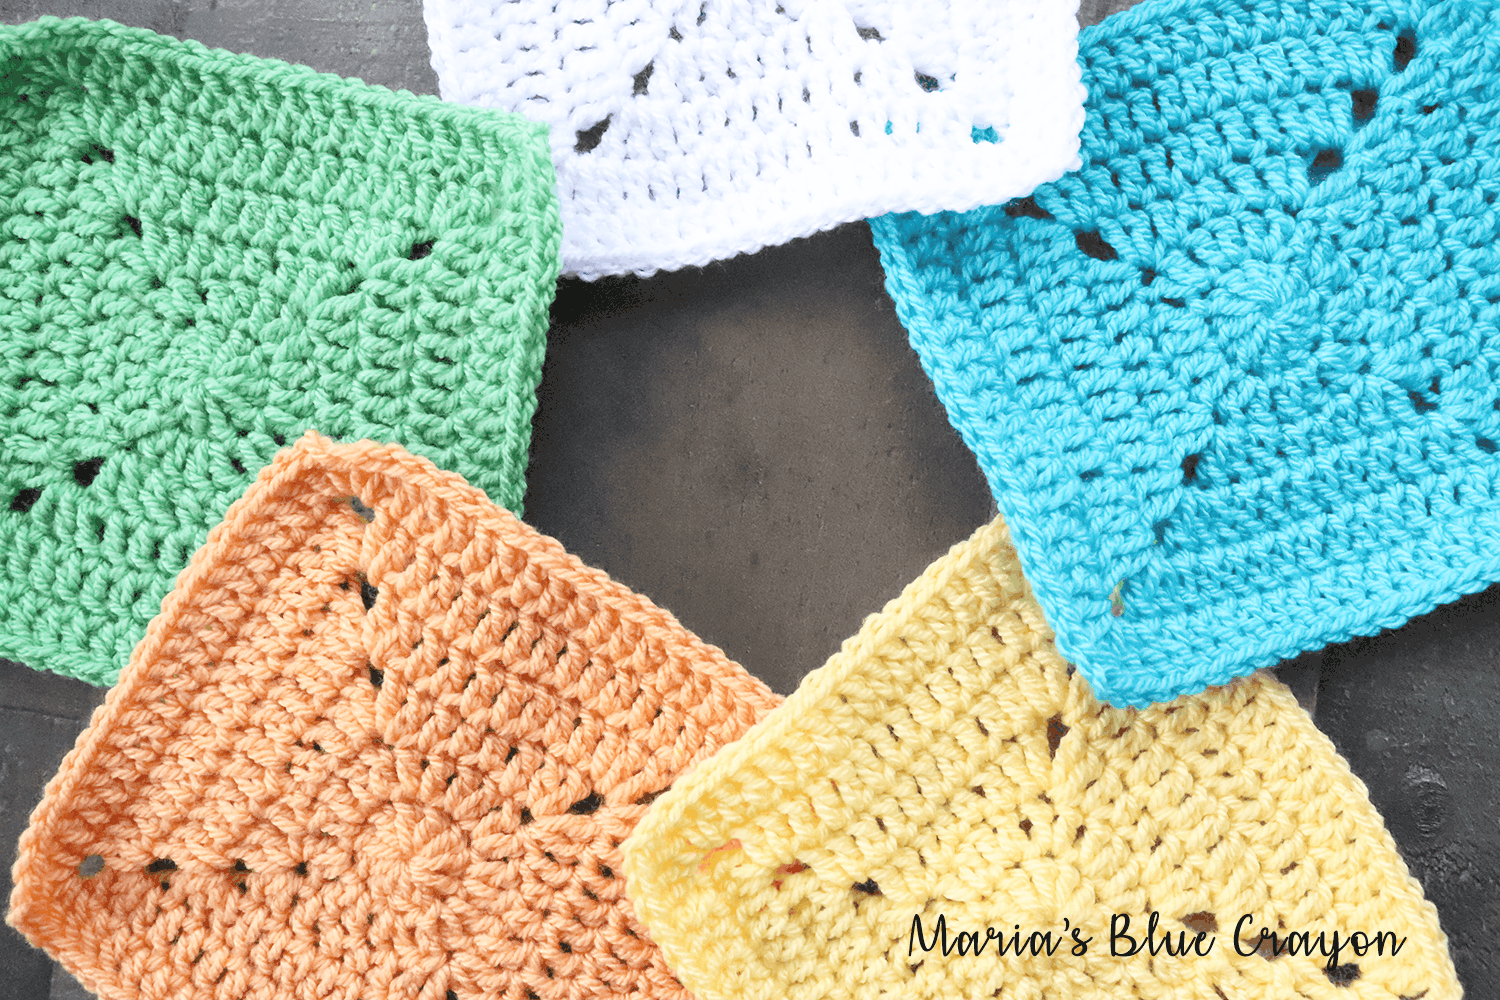 How to crochet a granny square for beginners with our video tutorial